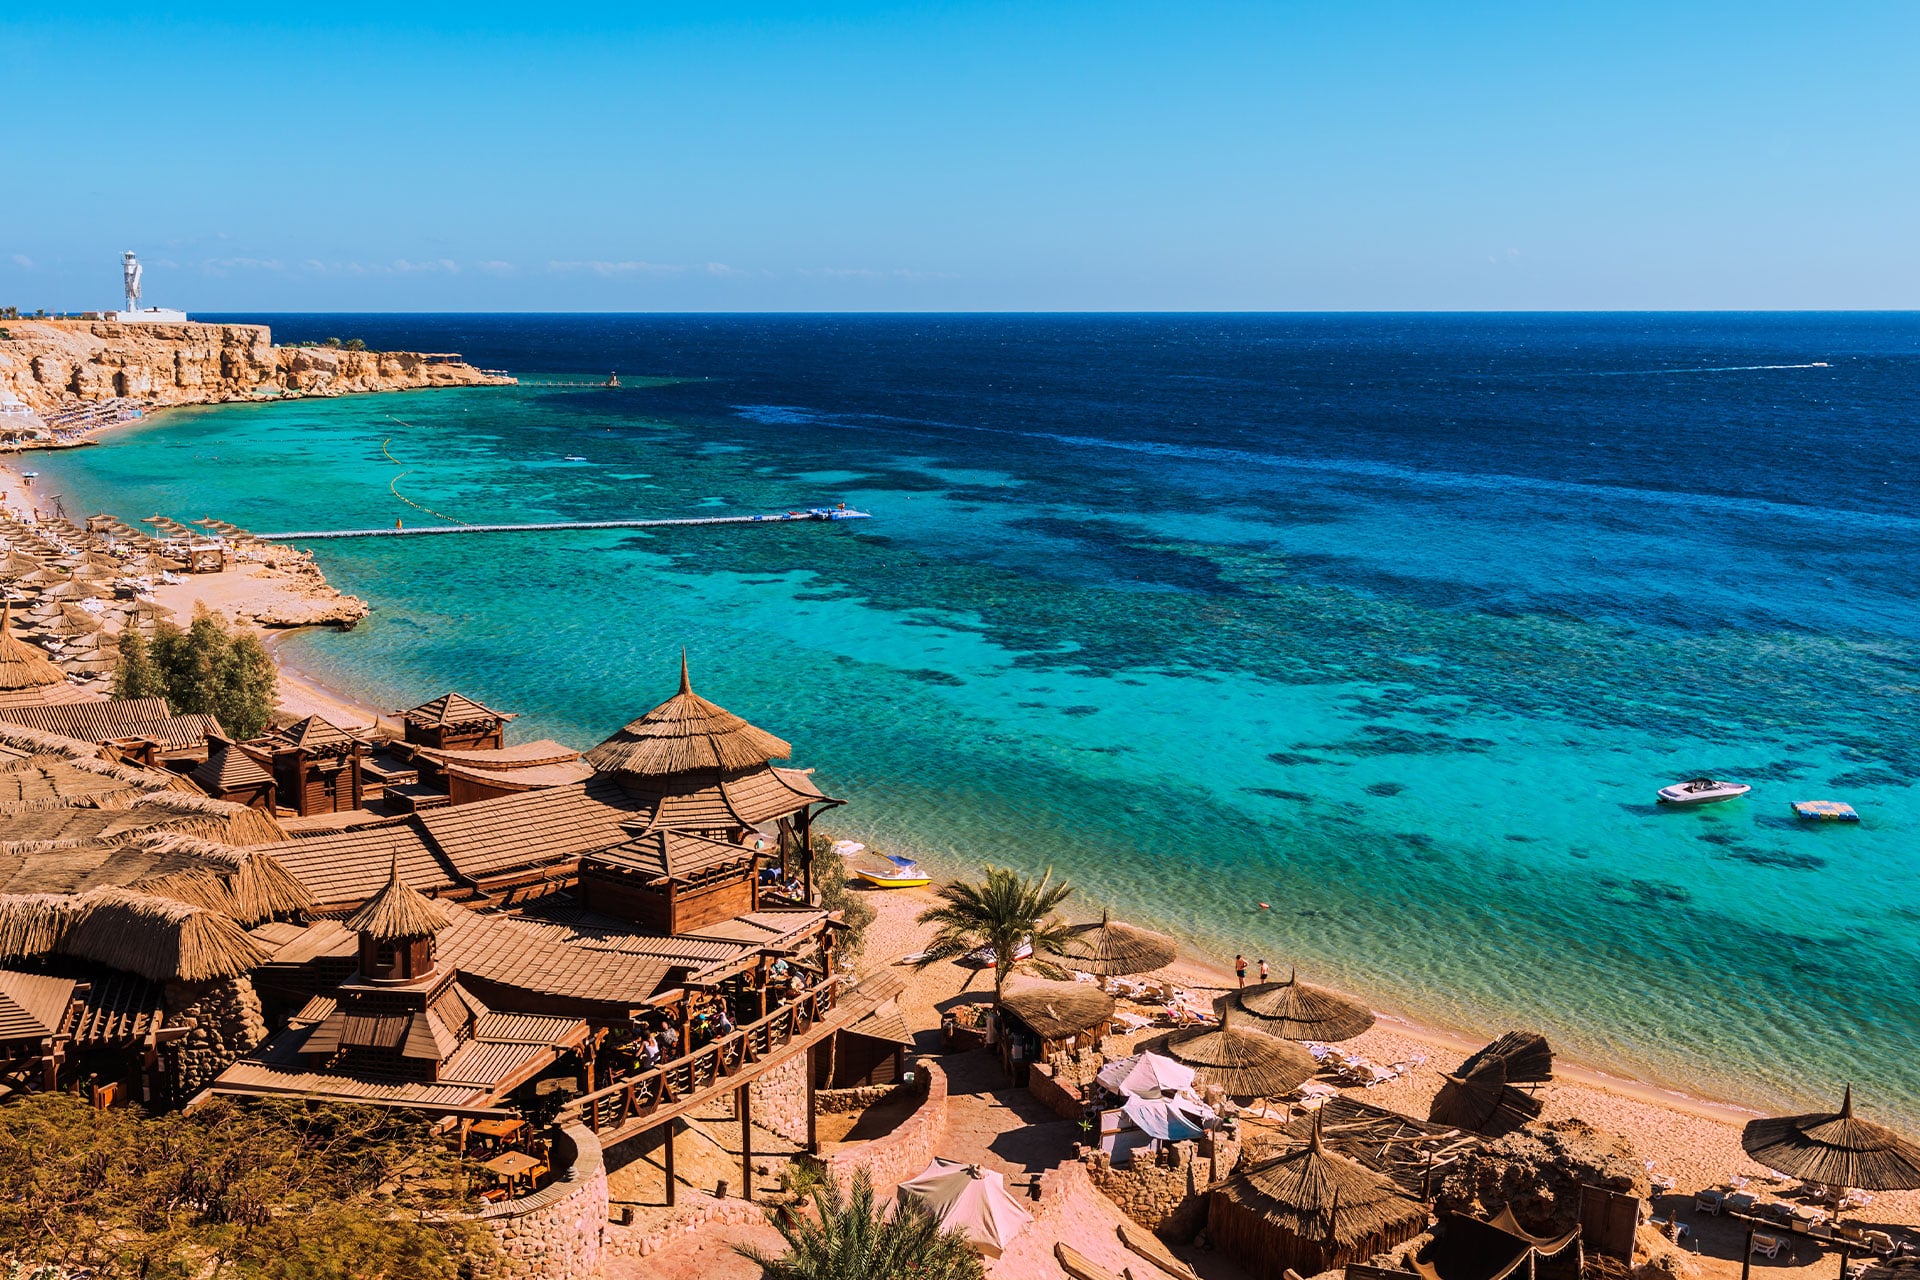 The coastal town of Sharm el-Sheikh, located between the desert of the Sinai Peninsula and the Red Sea – one of the top attractions in Egypt.